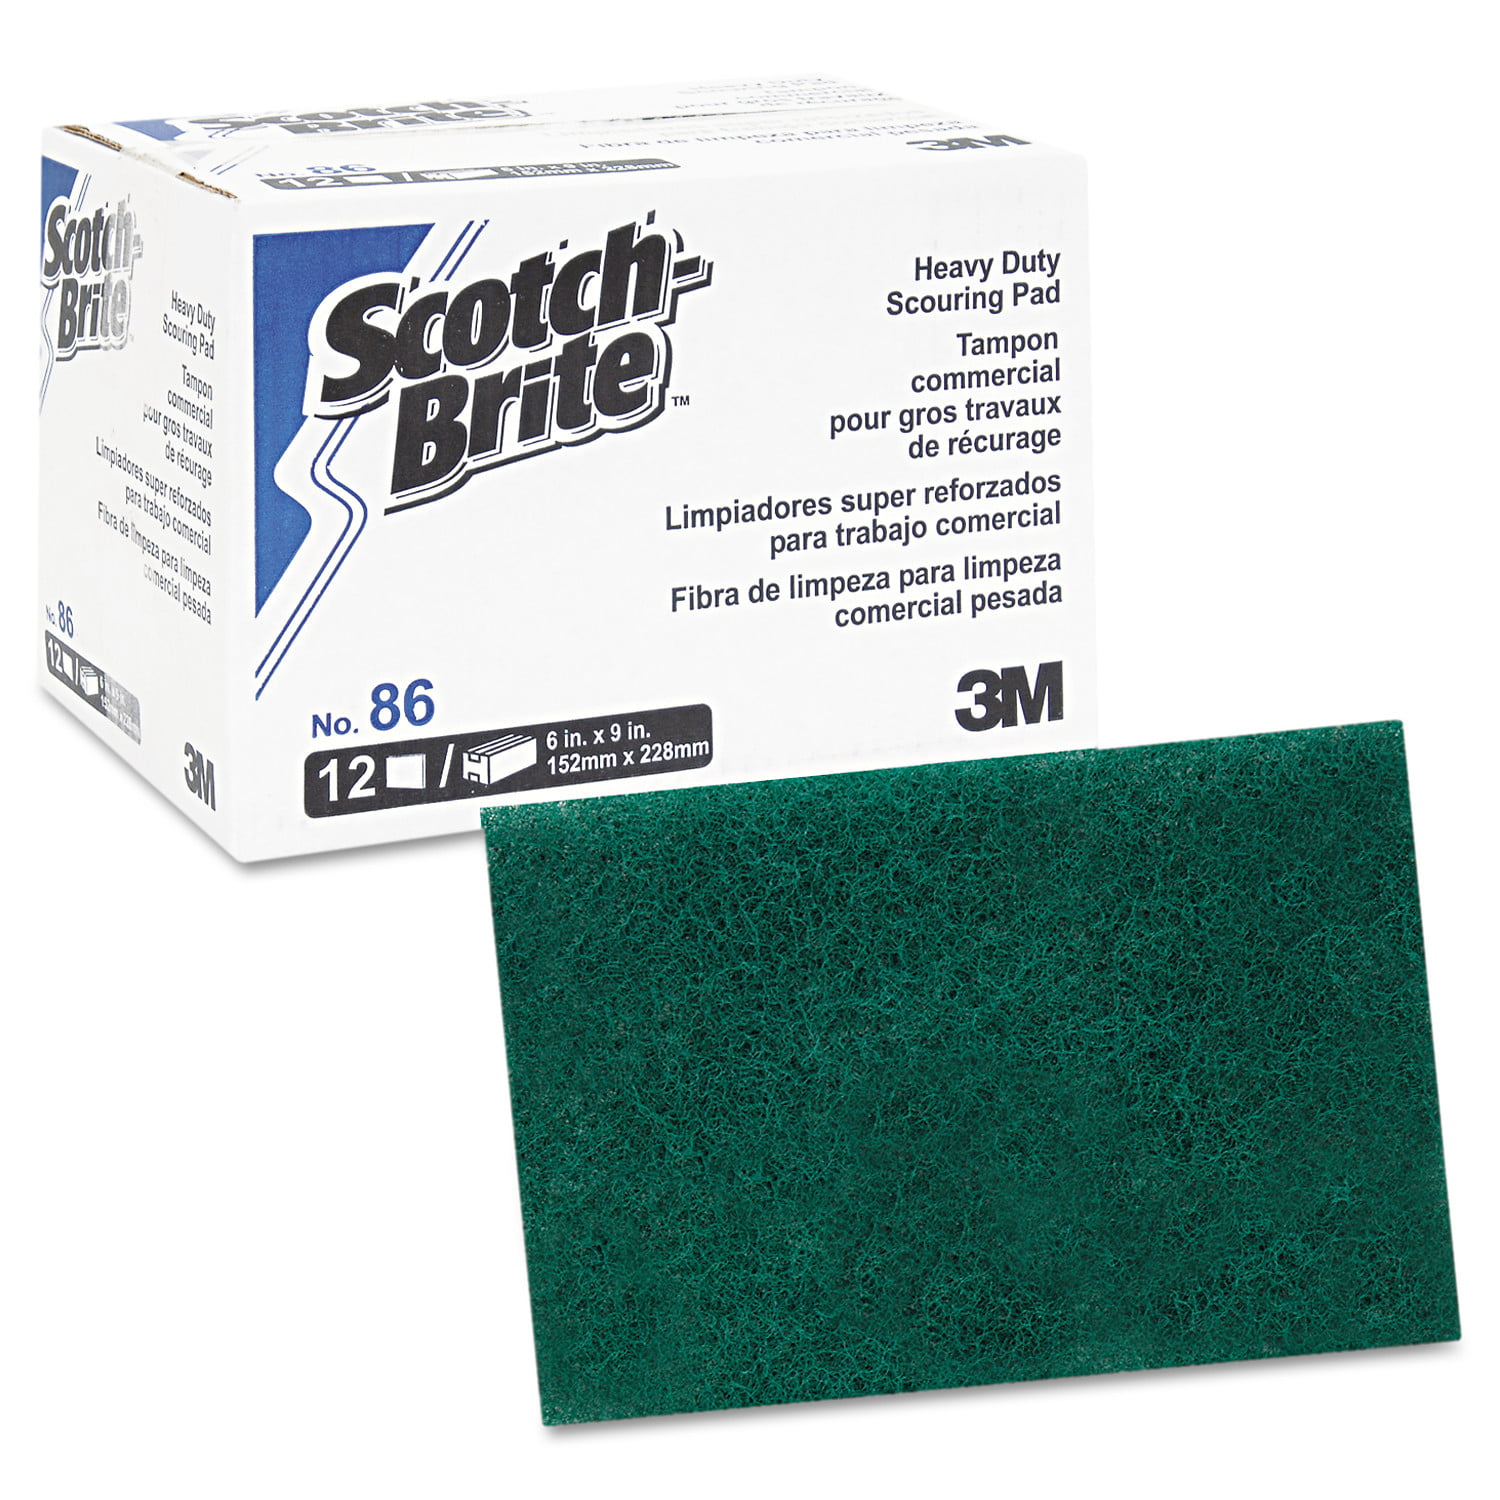 6 x 9 NEW 3M Scotch-Brite Commercial Scouring Pad 10/pack 